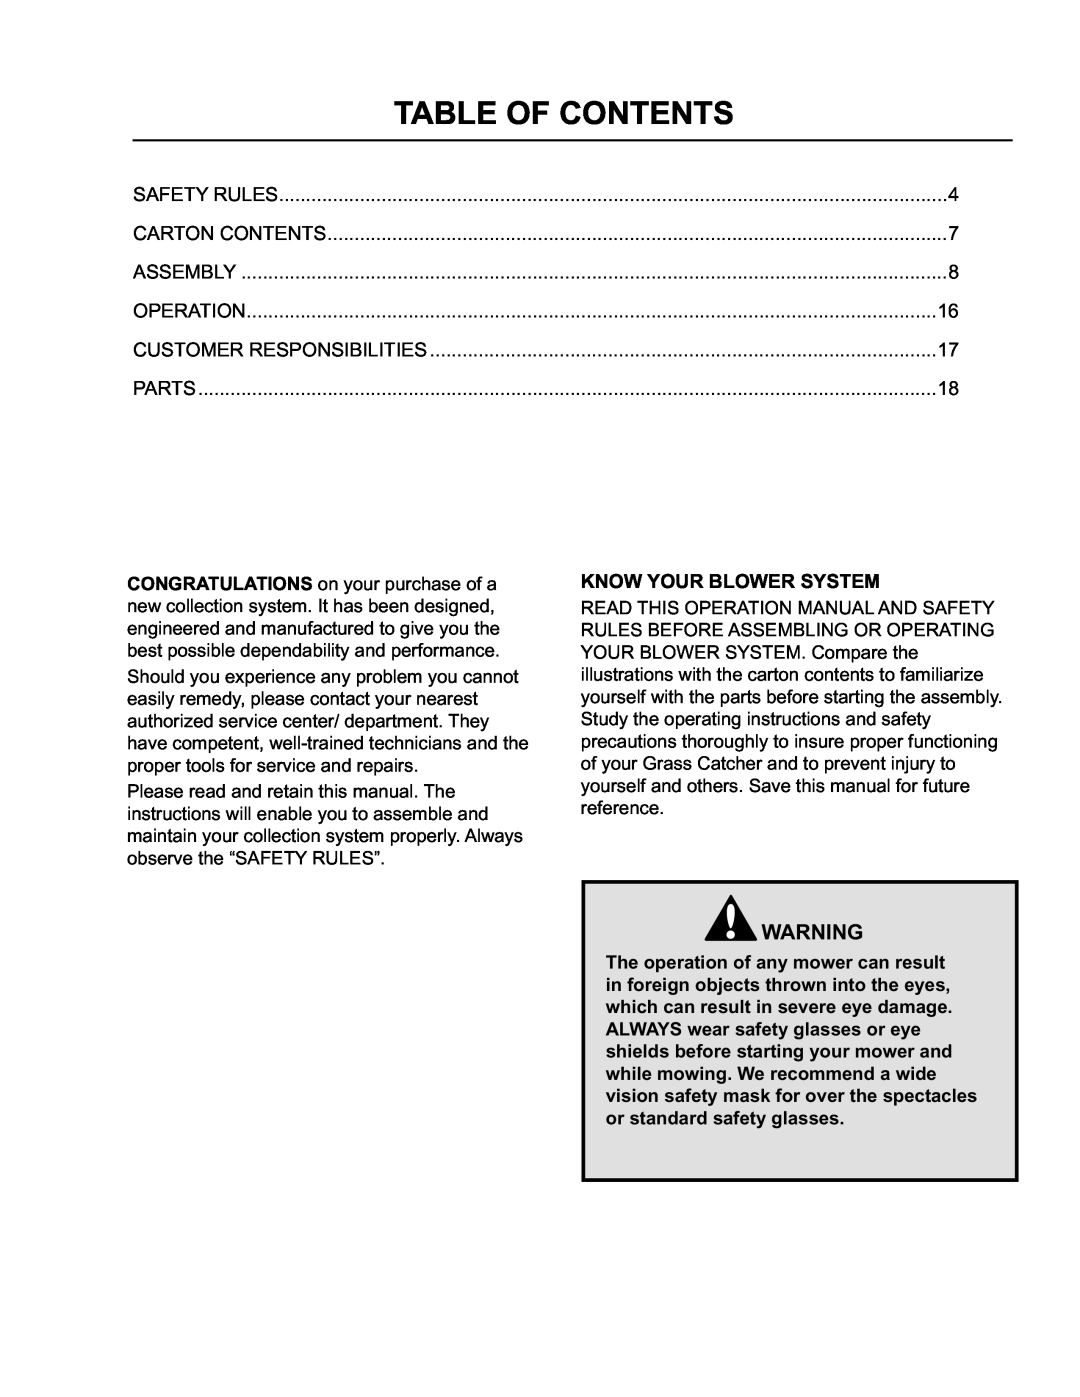 Husqvarna O0803001 Table Of Contents, Know Your Blower System, Safety Rules, Carton Contents, Assembly, Operation, Parts 